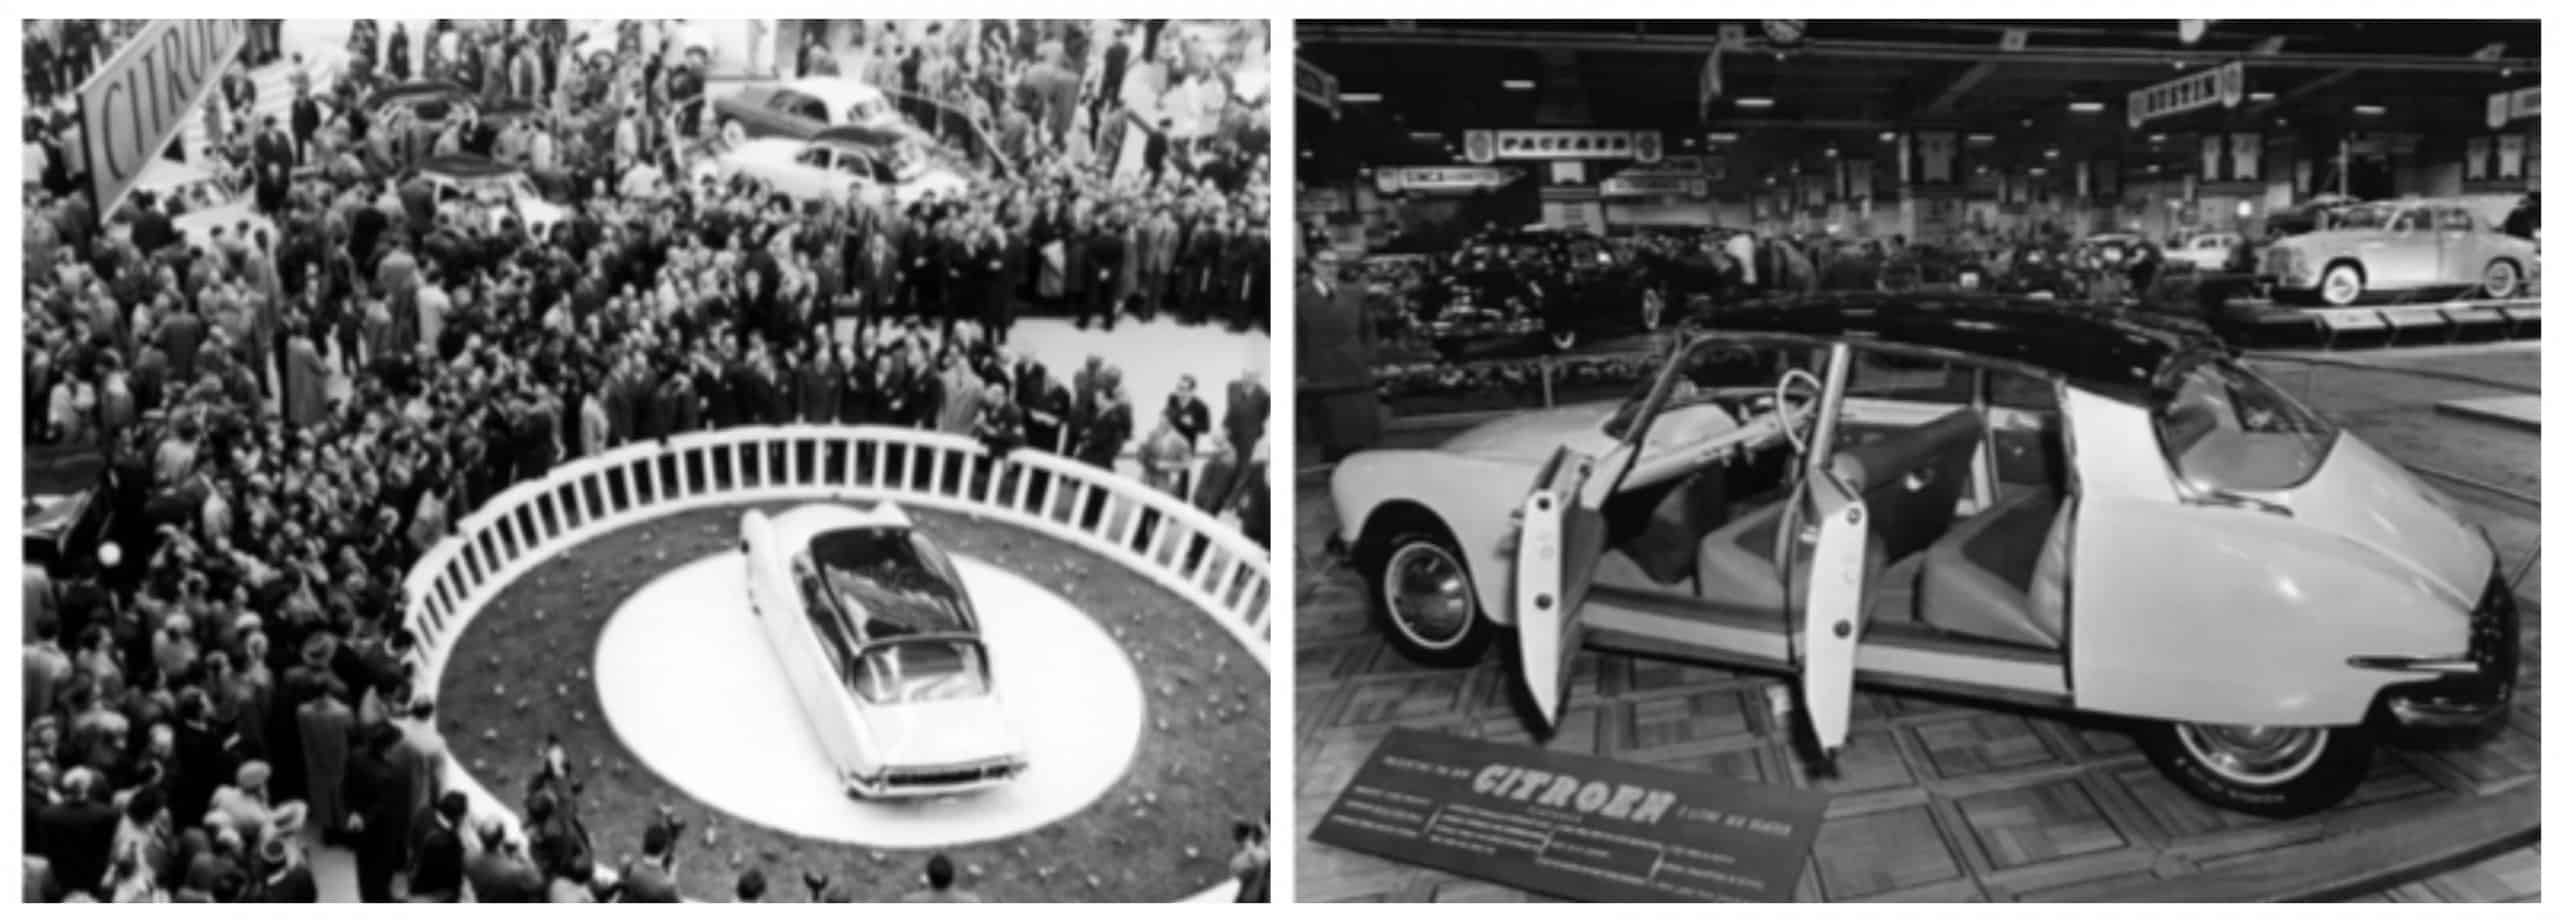 Citroen DS: from birth to rally | Exceptional Cars